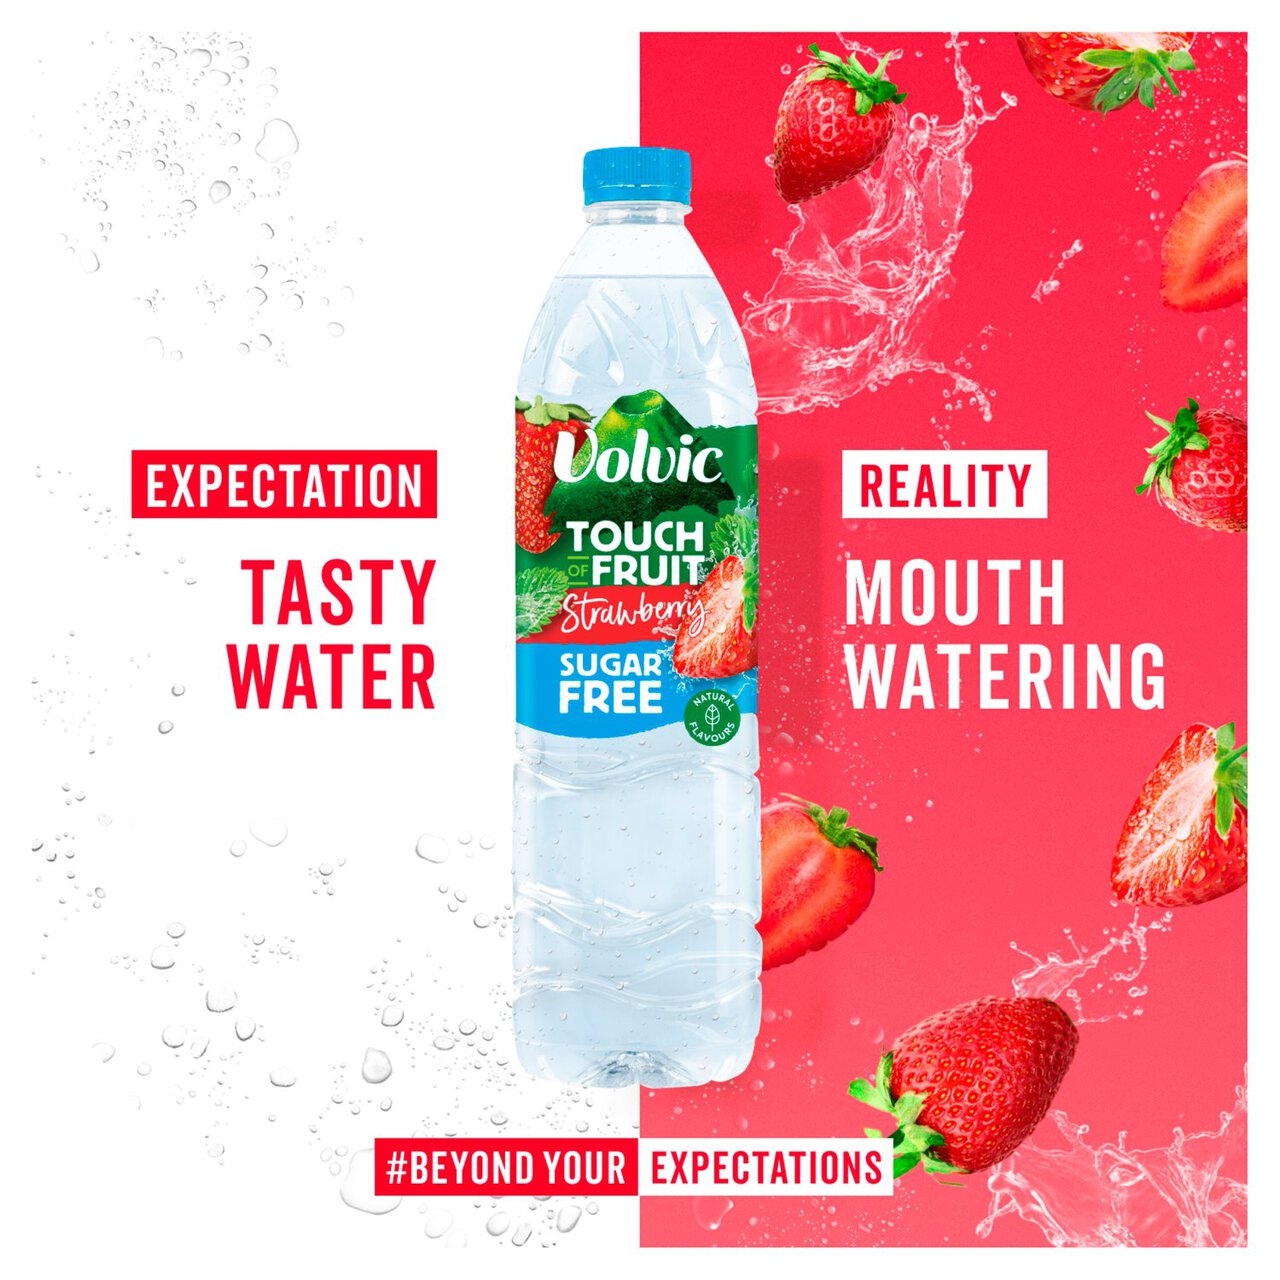 Volvic Sugar Free Touch of Fruit Strawberry 1.5l